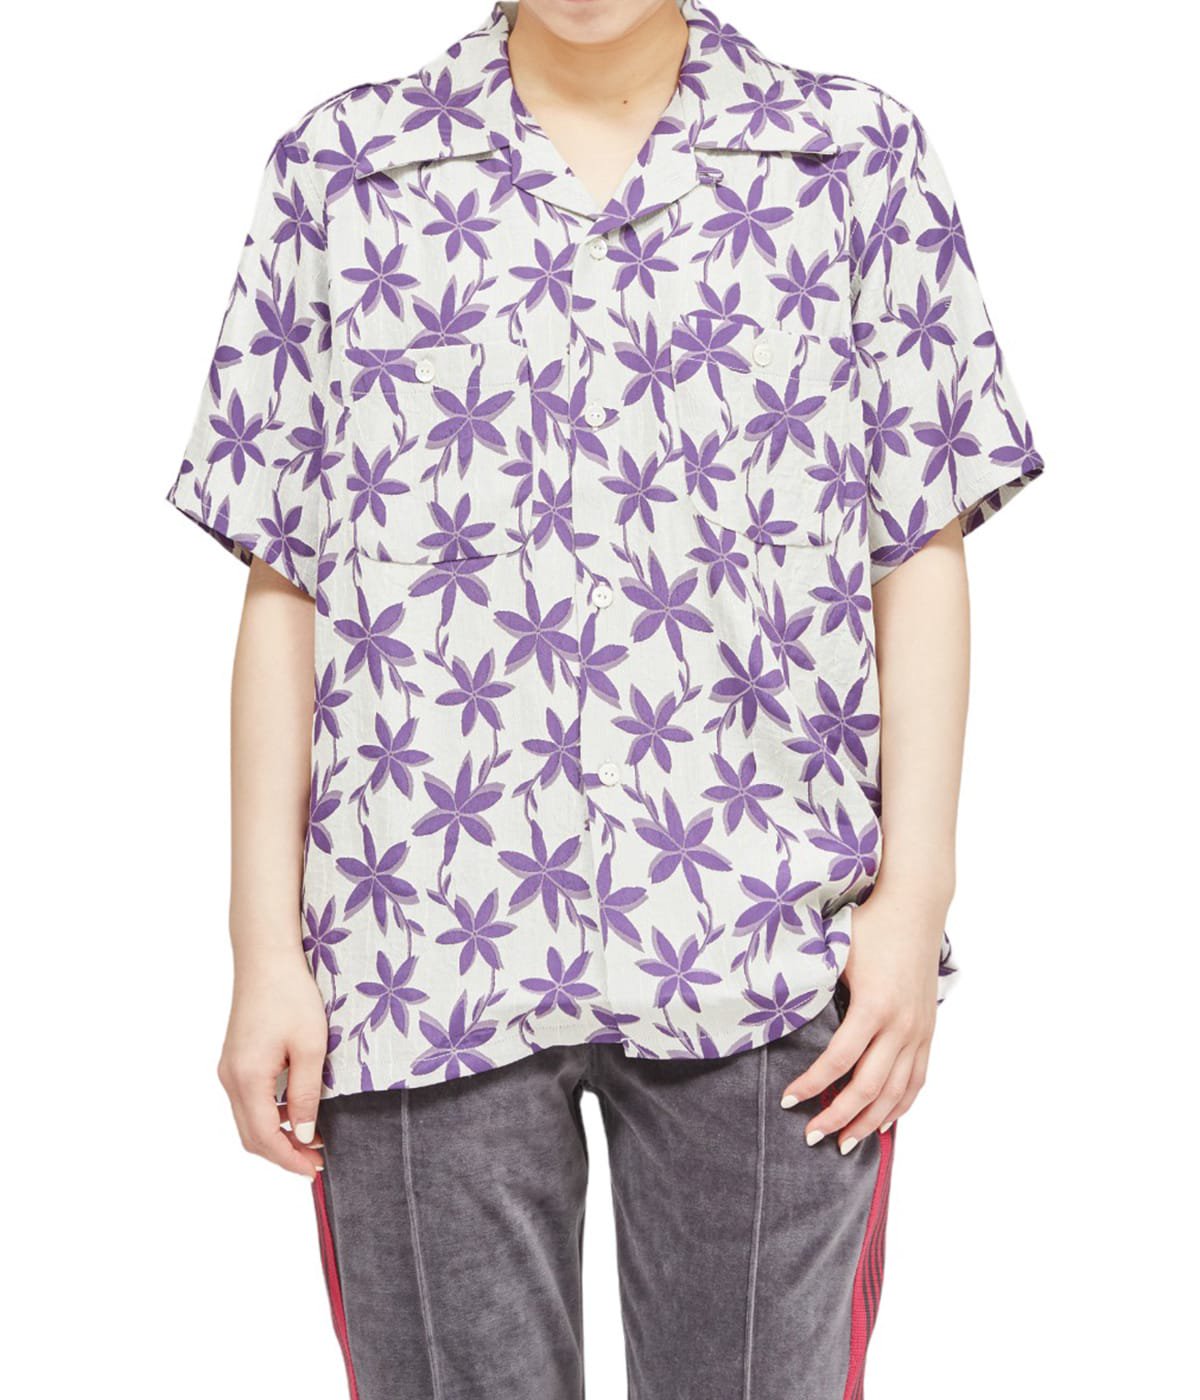 S/S One-Up Shirt - ACE/R Floral Jq. | NEEDLES(ニードルズ 